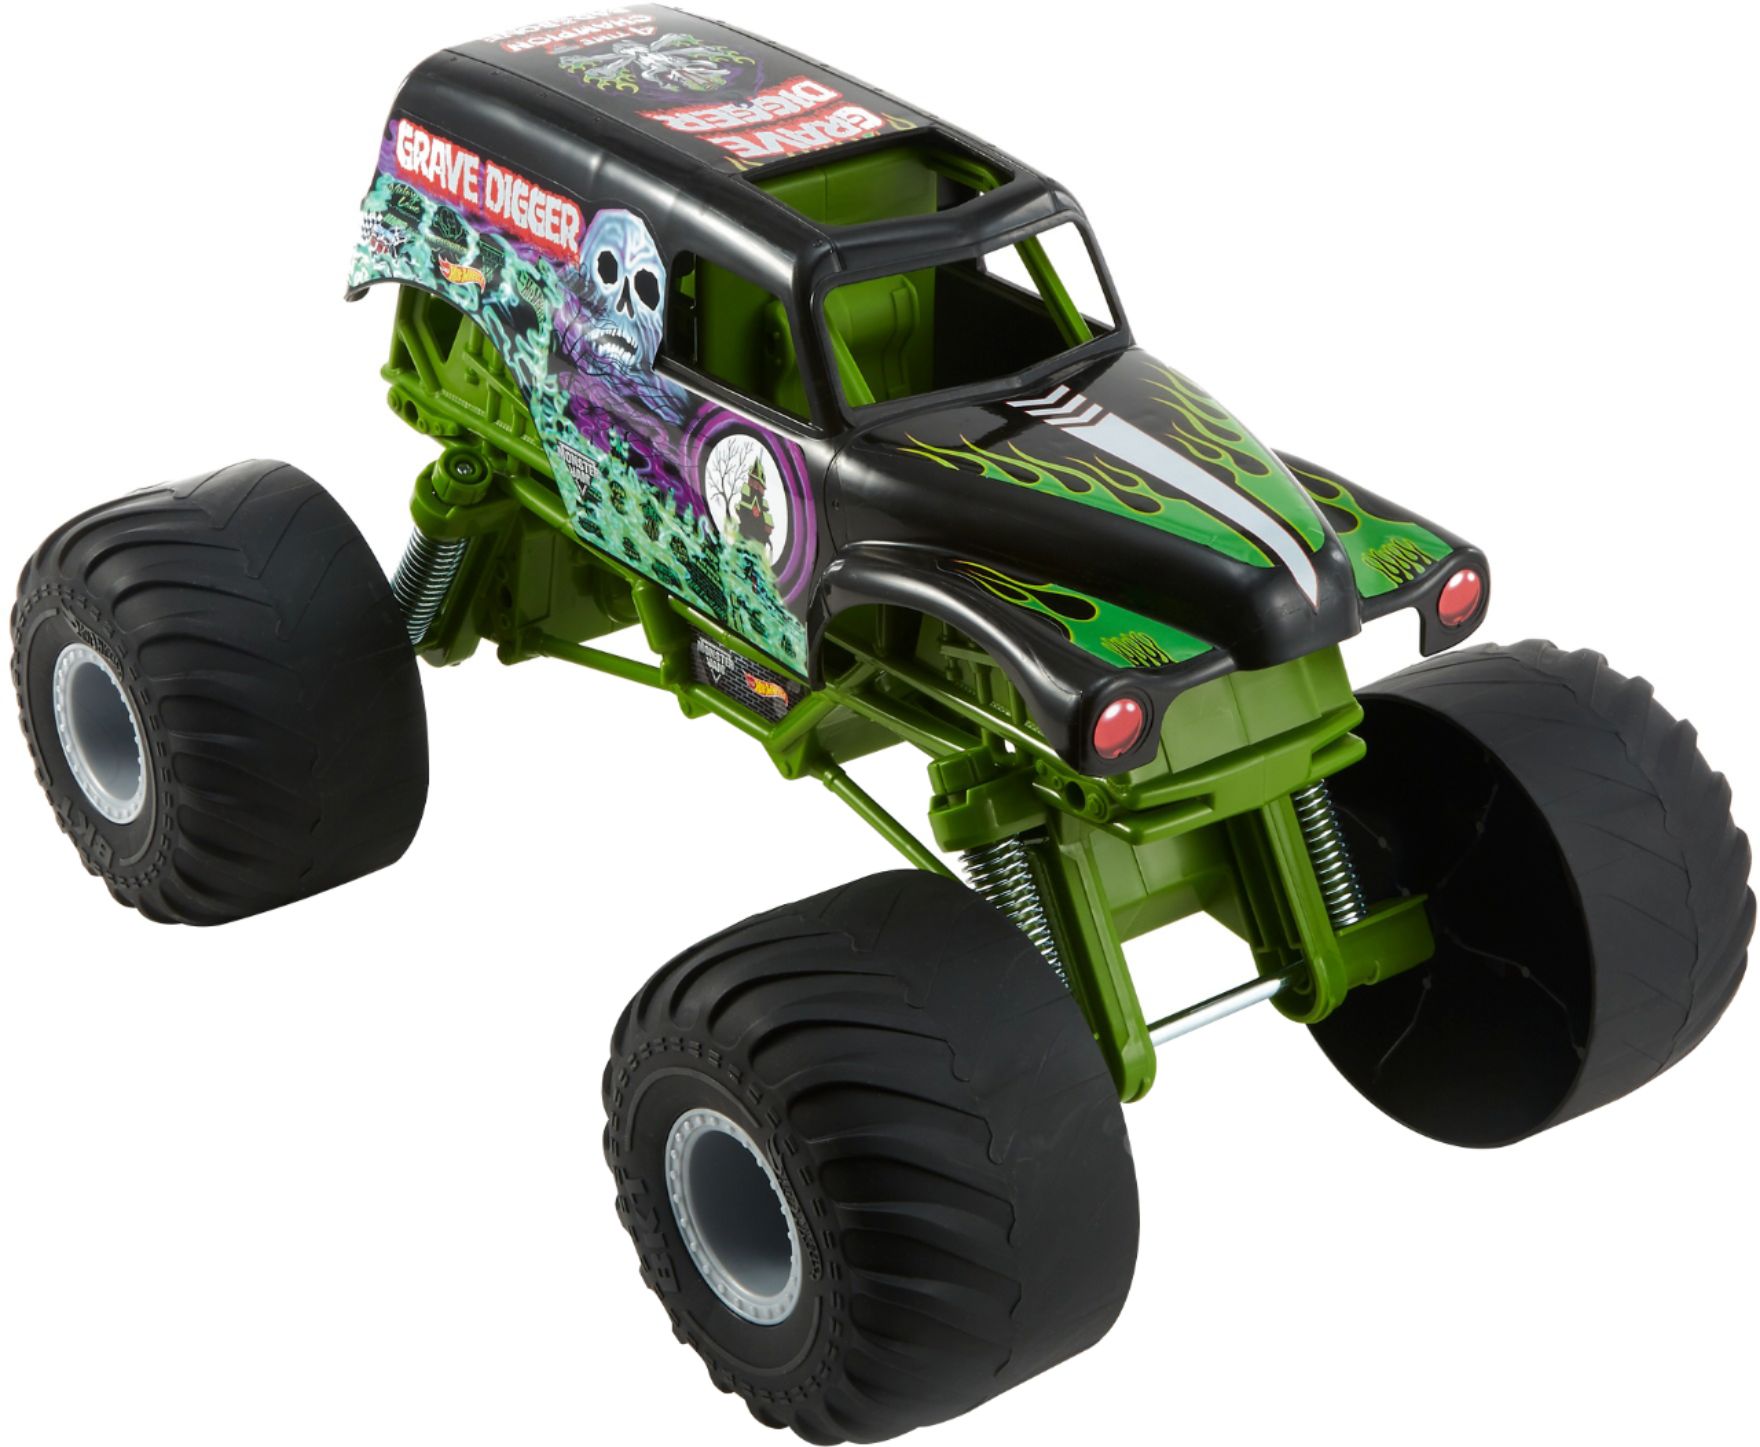 The Ultimate Monster Truck - Take an Inside Look Grave Digger